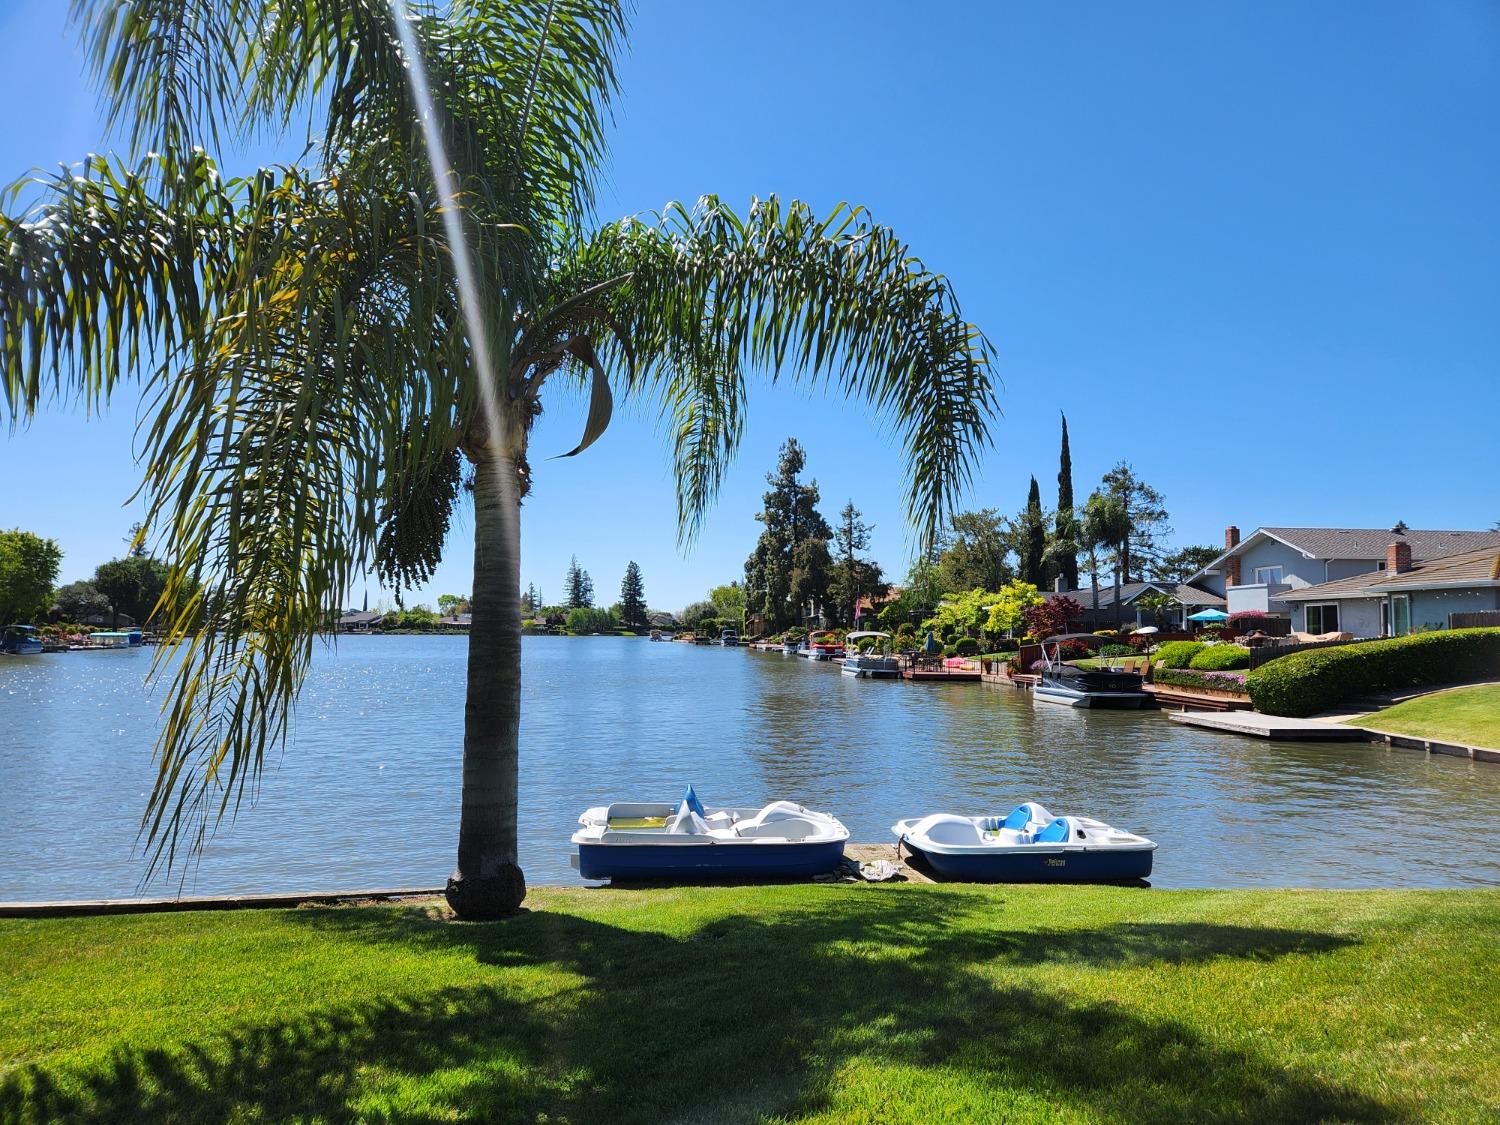 a view of a lake with lawn chairs and palm trees